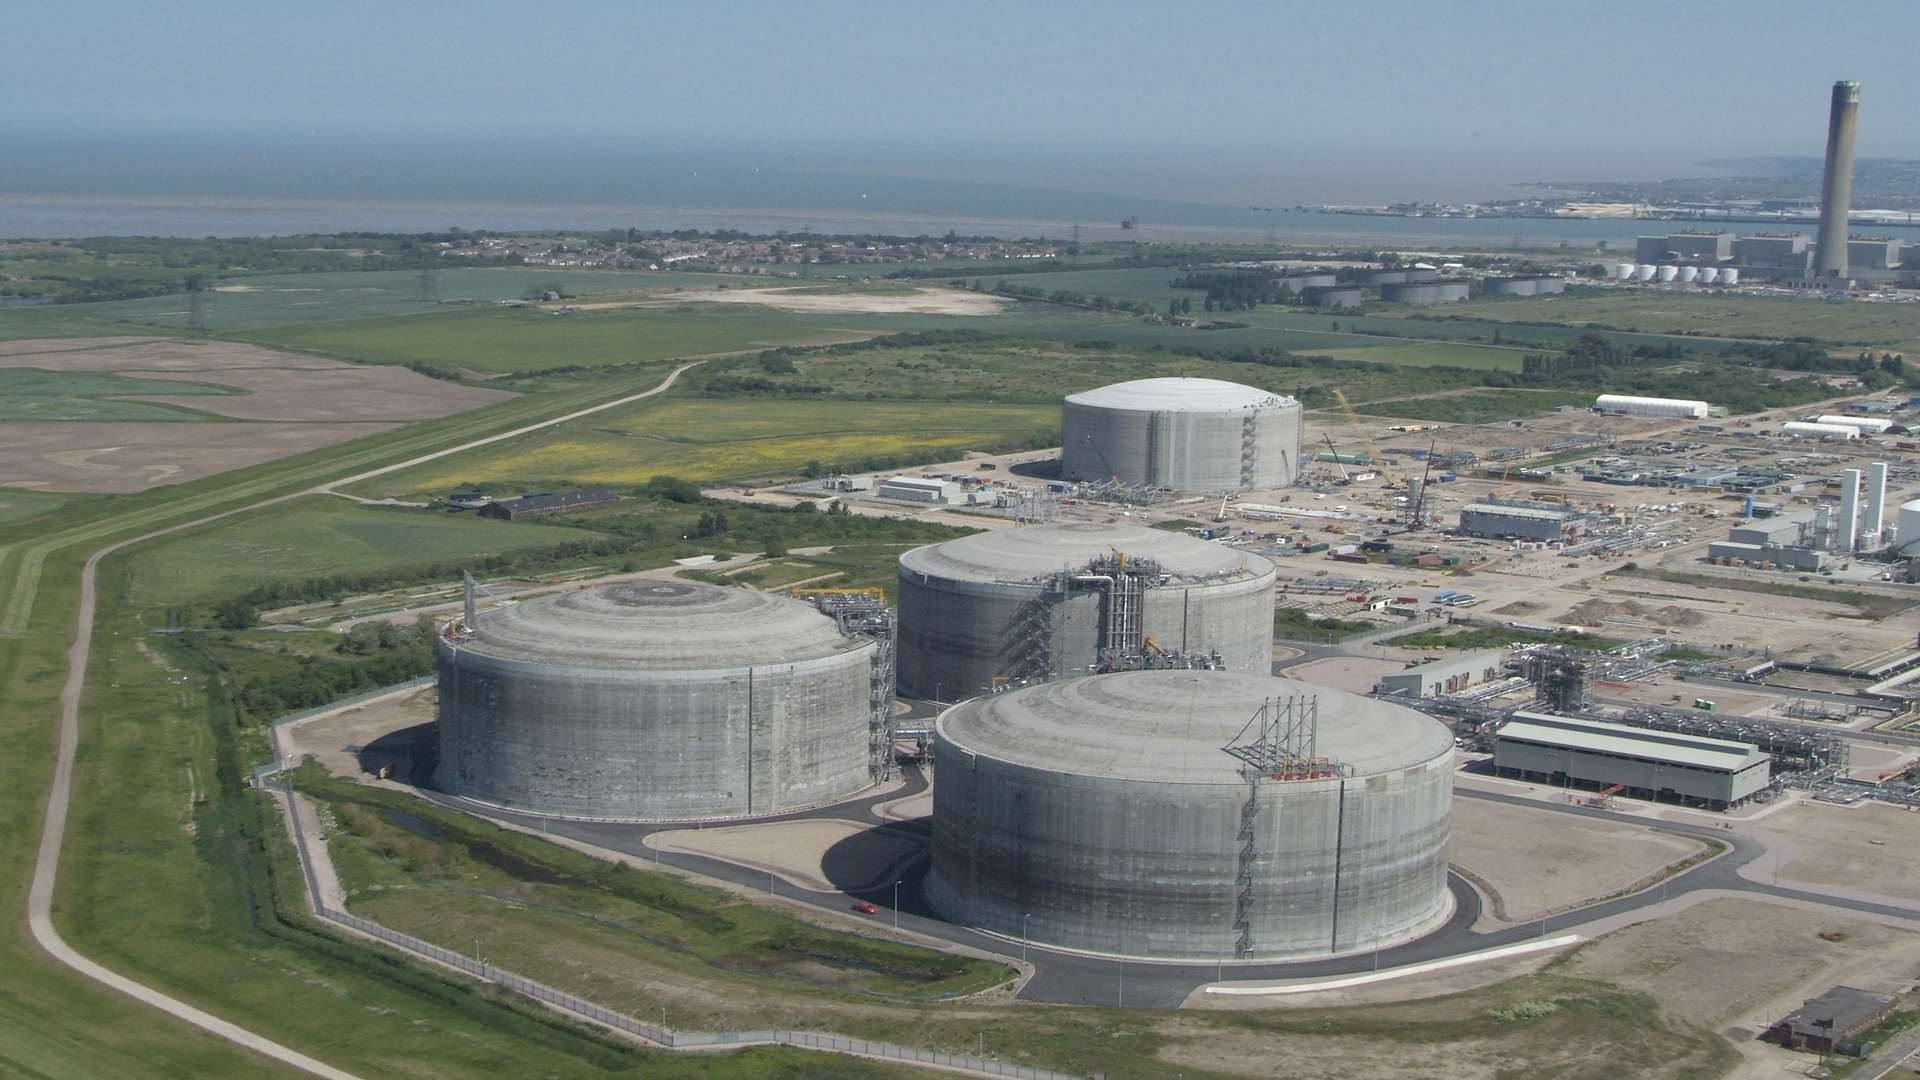 The National Grid LNG importation terminal at the Isle of Grain